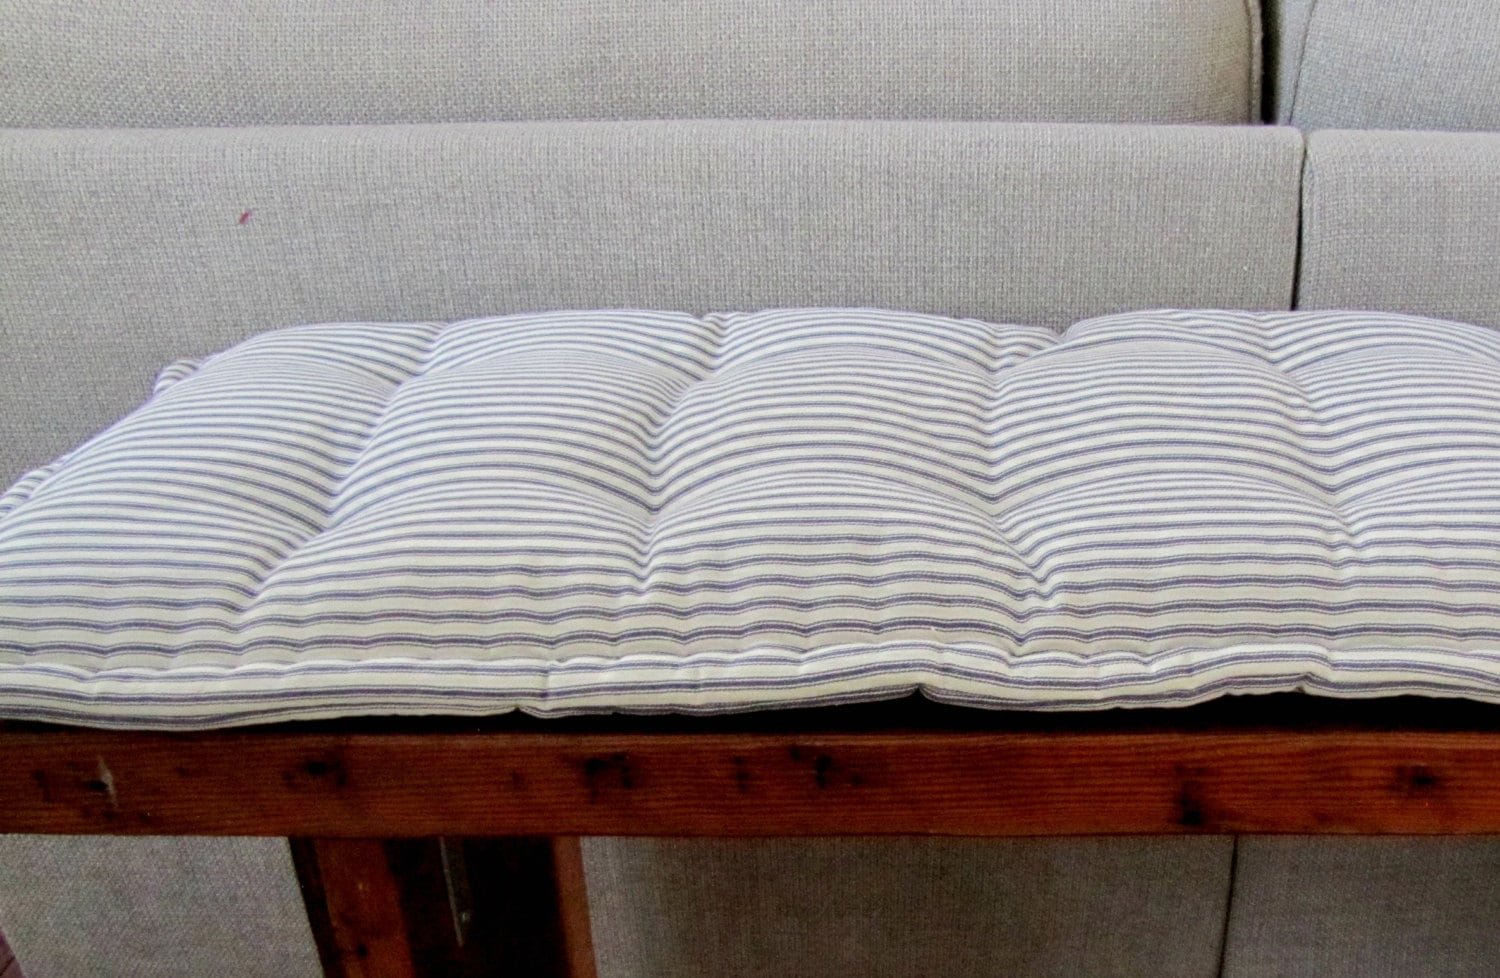 Grateful Home — Custom French Mattress Bench Cushion with Lumbar Back  Pillows in Blue Ticking Stripe Fabric